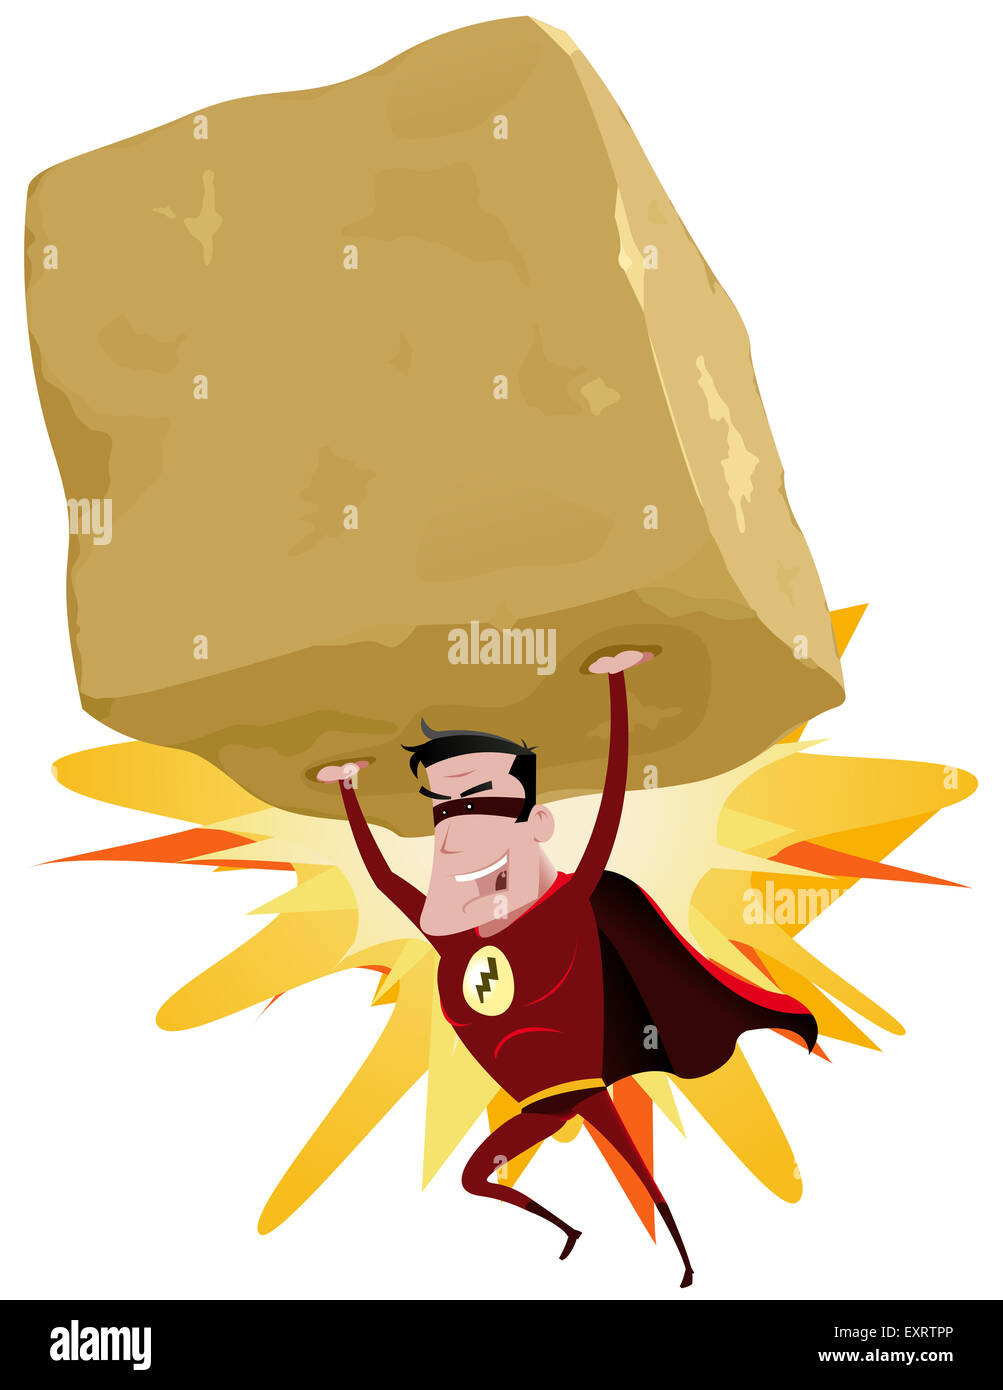 Illustration of a comic red superhero throwing a big heavy rock with his superpower, and copy space inside the boulder Stock Photo